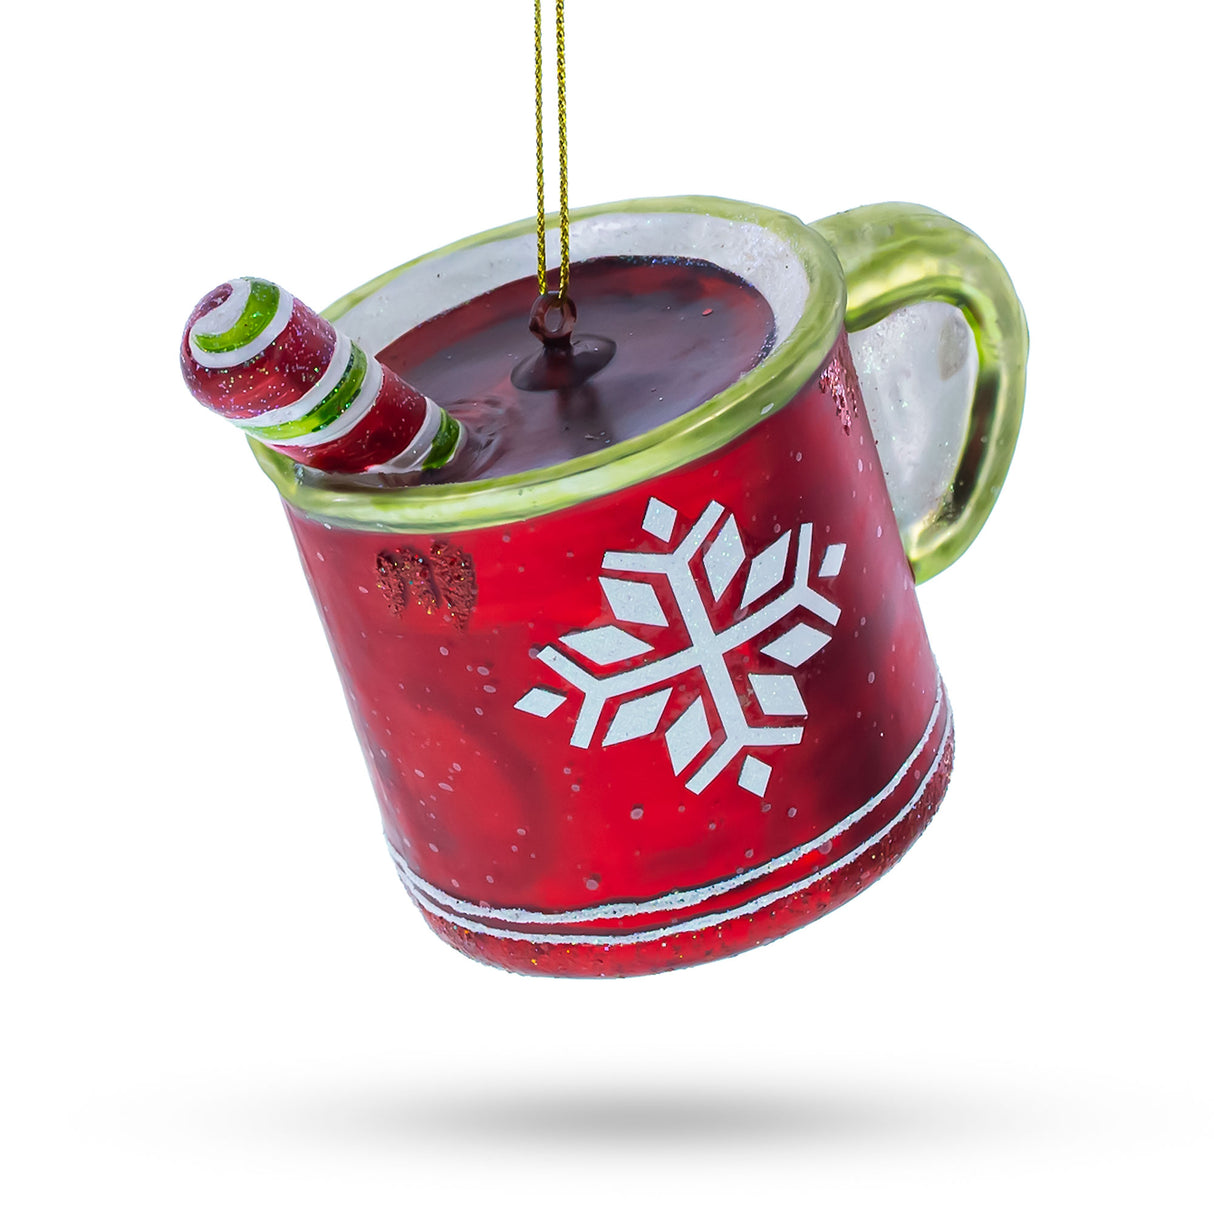 Festive Cup with Candy Cane Drink - Blown Glass Christmas Ornament in Multi color,  shape